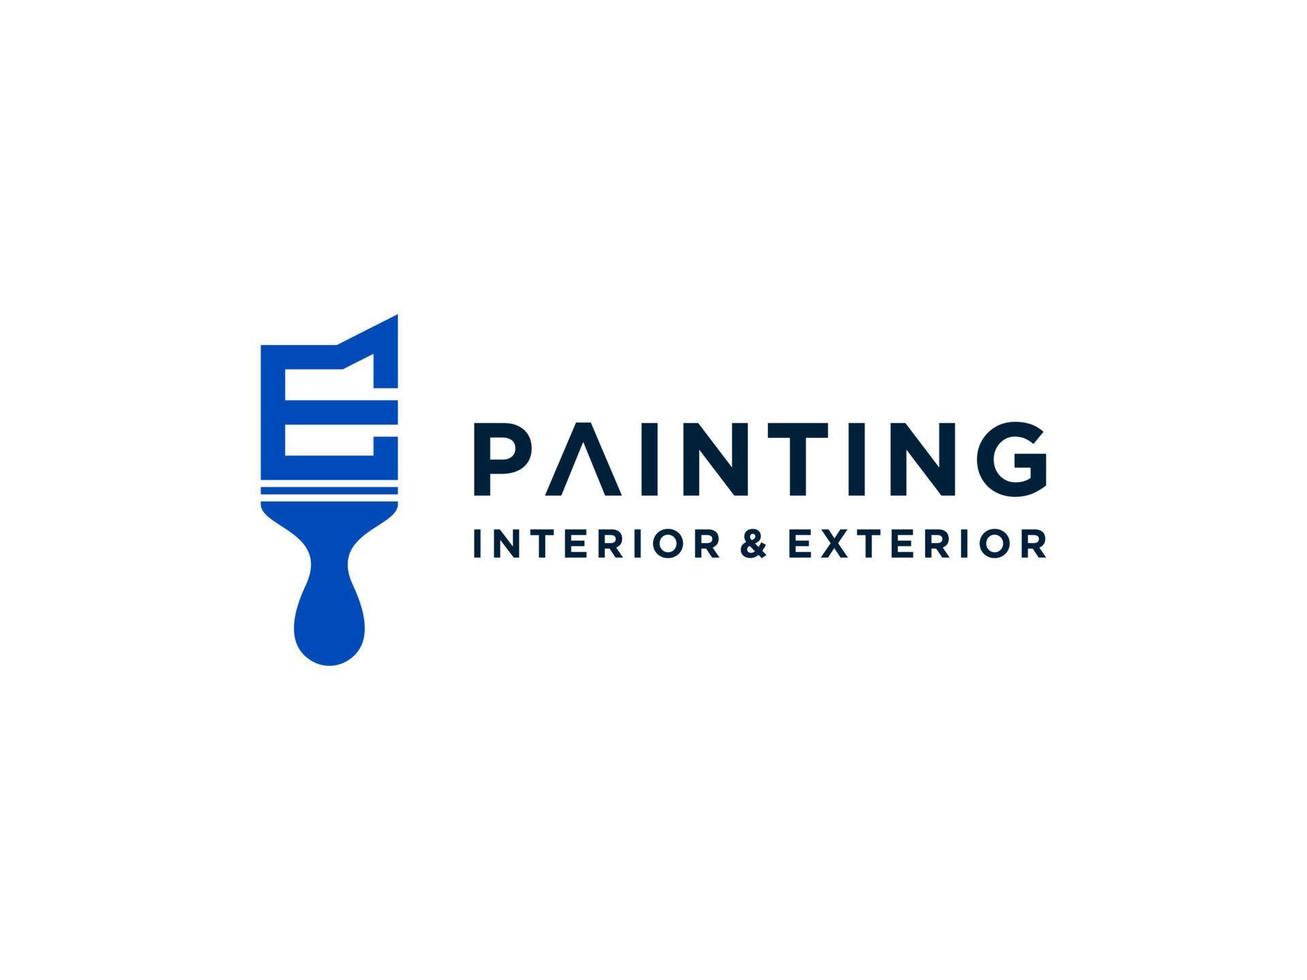 Painting logo template with initial E concept Premium Vector Free Vector